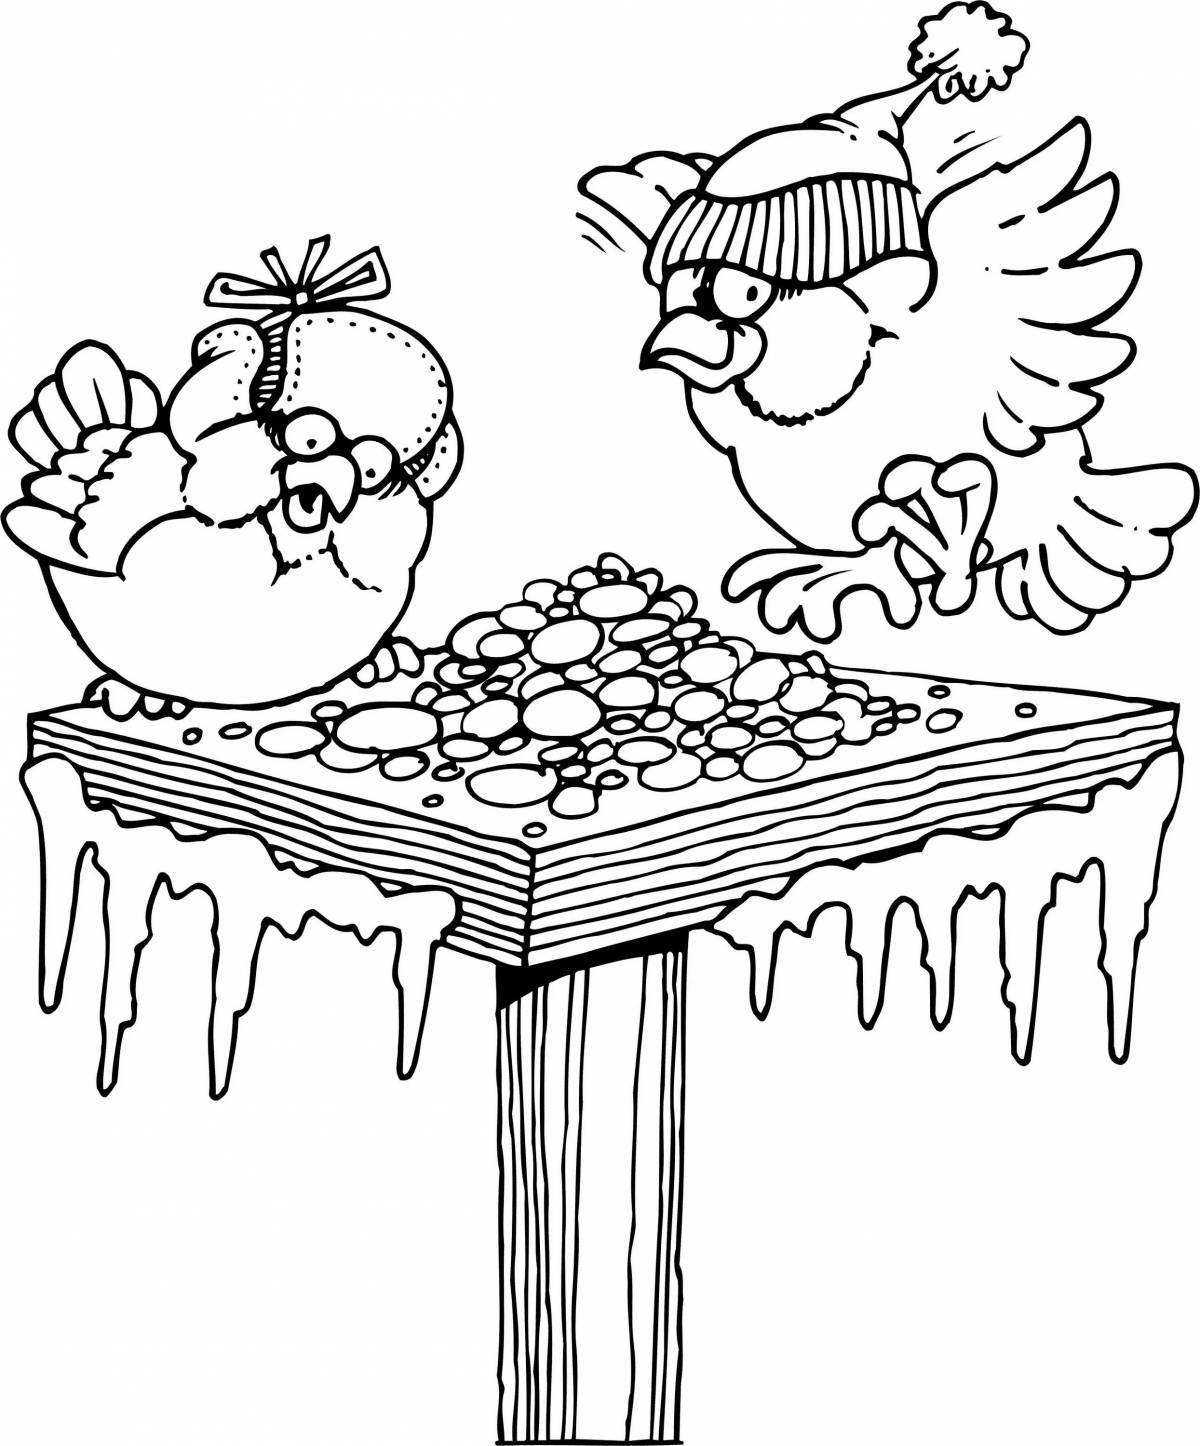 Serene coloring page bird feeding in winter